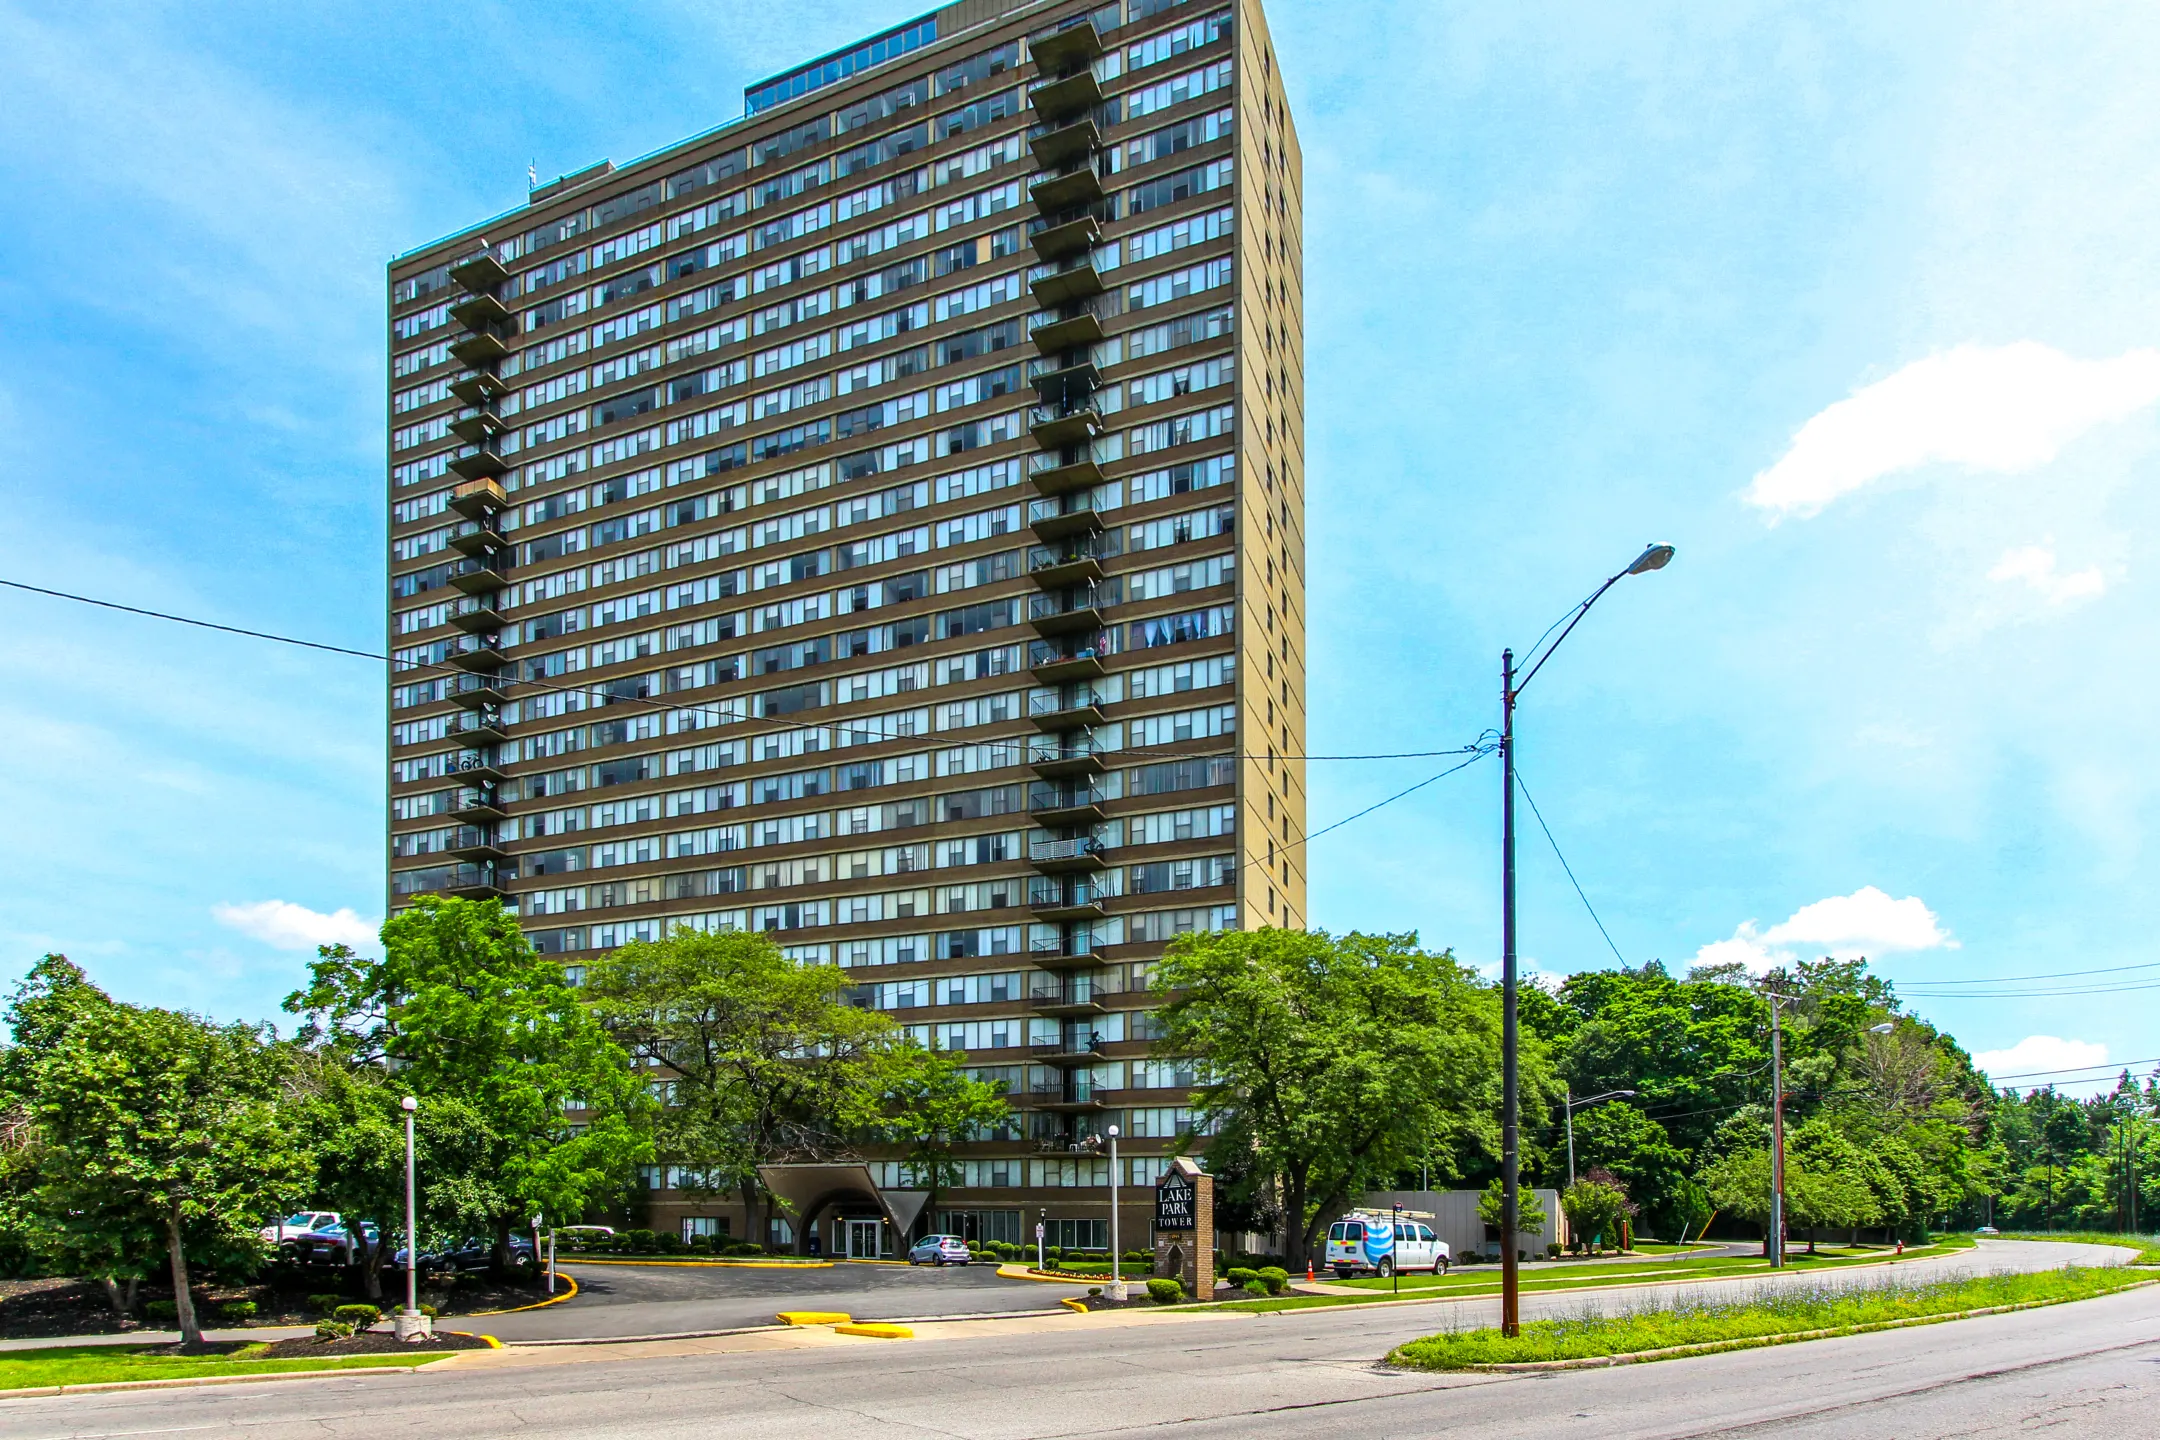 Lake Park Tower Apartments - Cleveland, OH